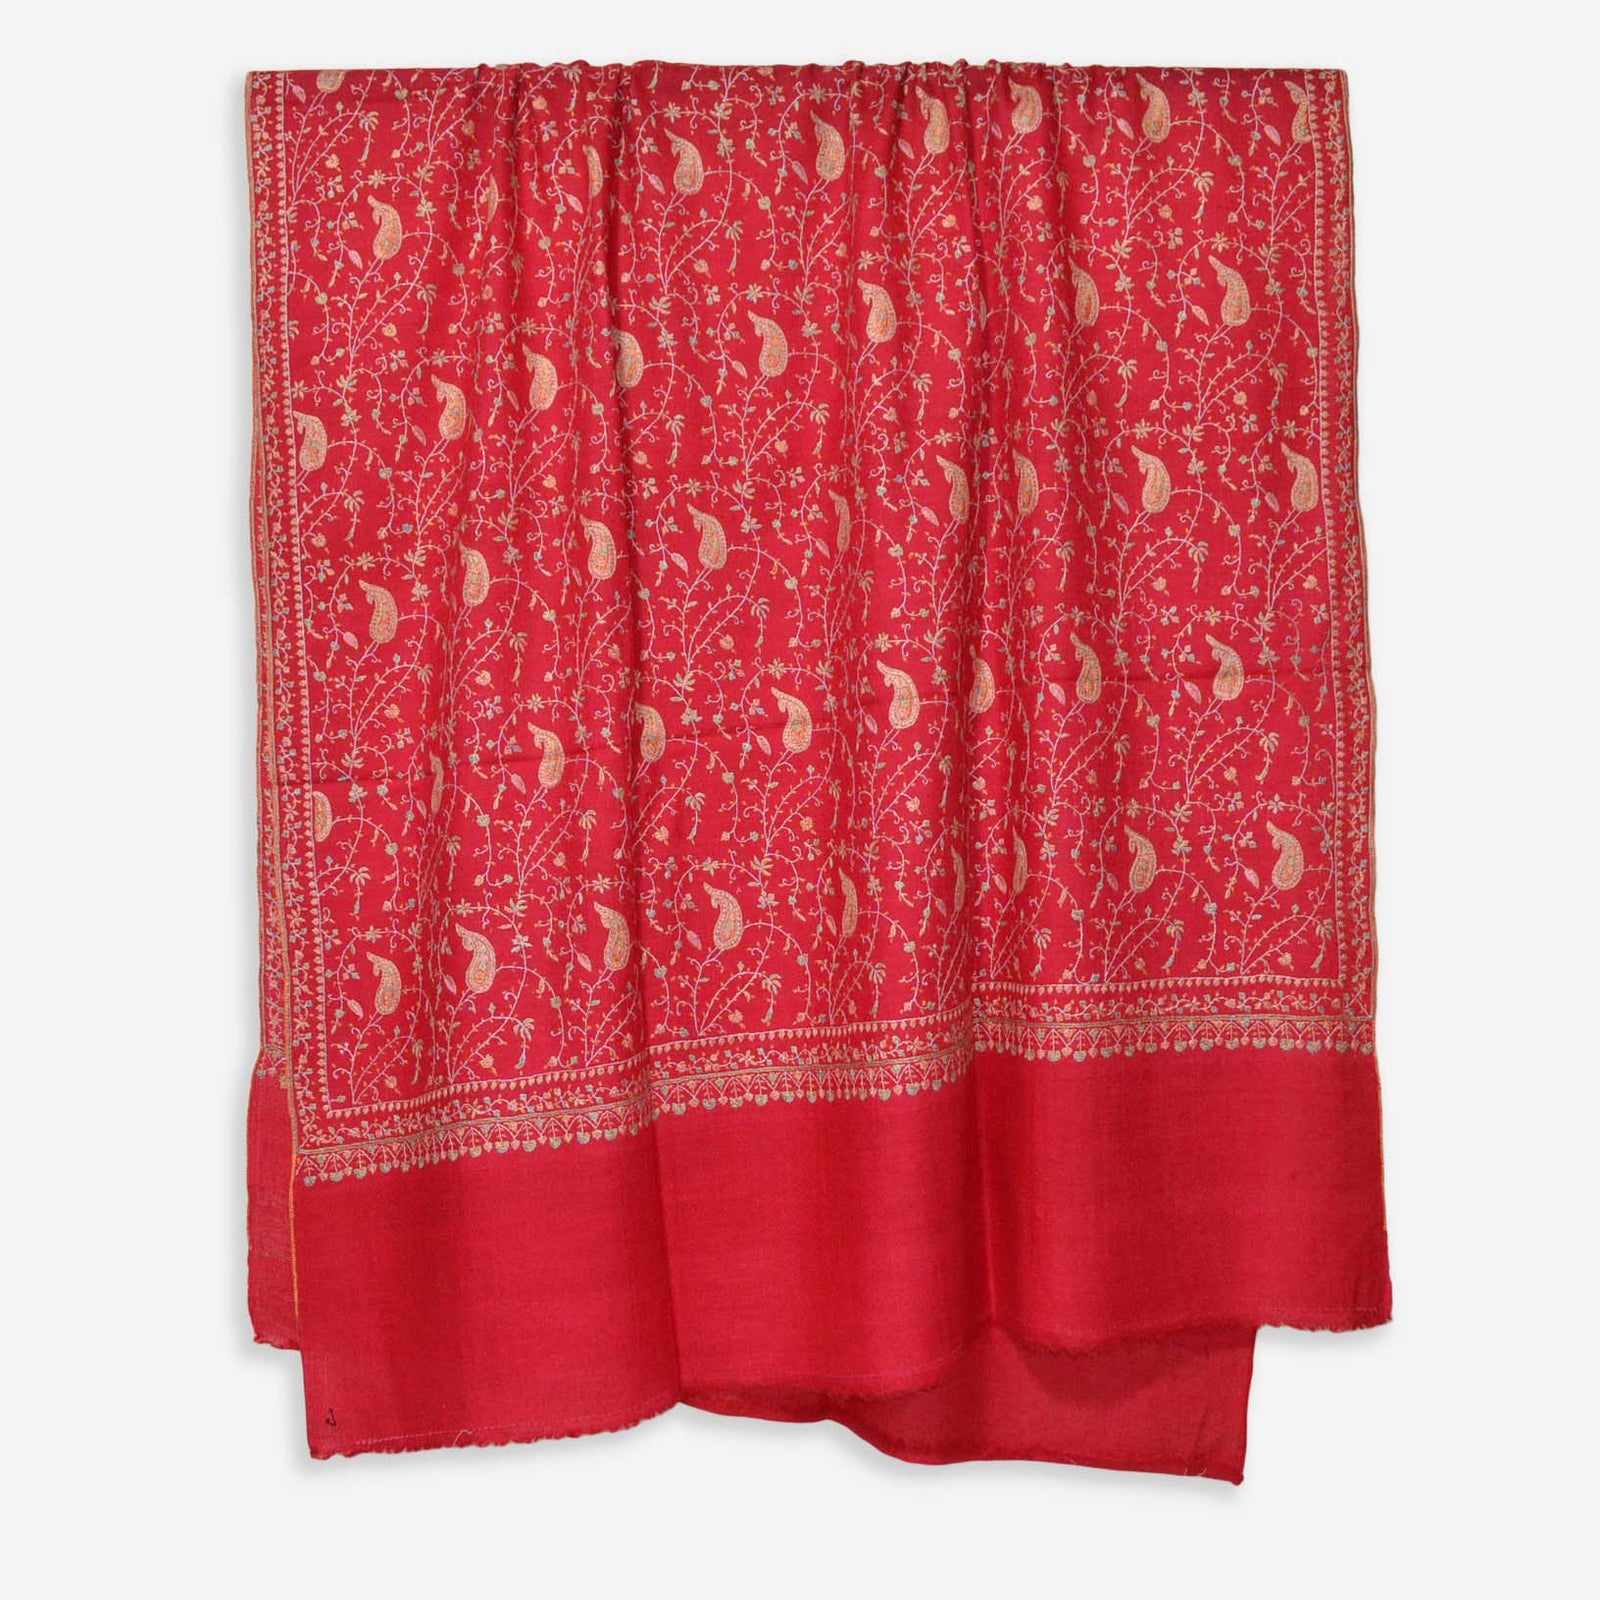 Buy cashmere pashmina red jali embroidered shawl